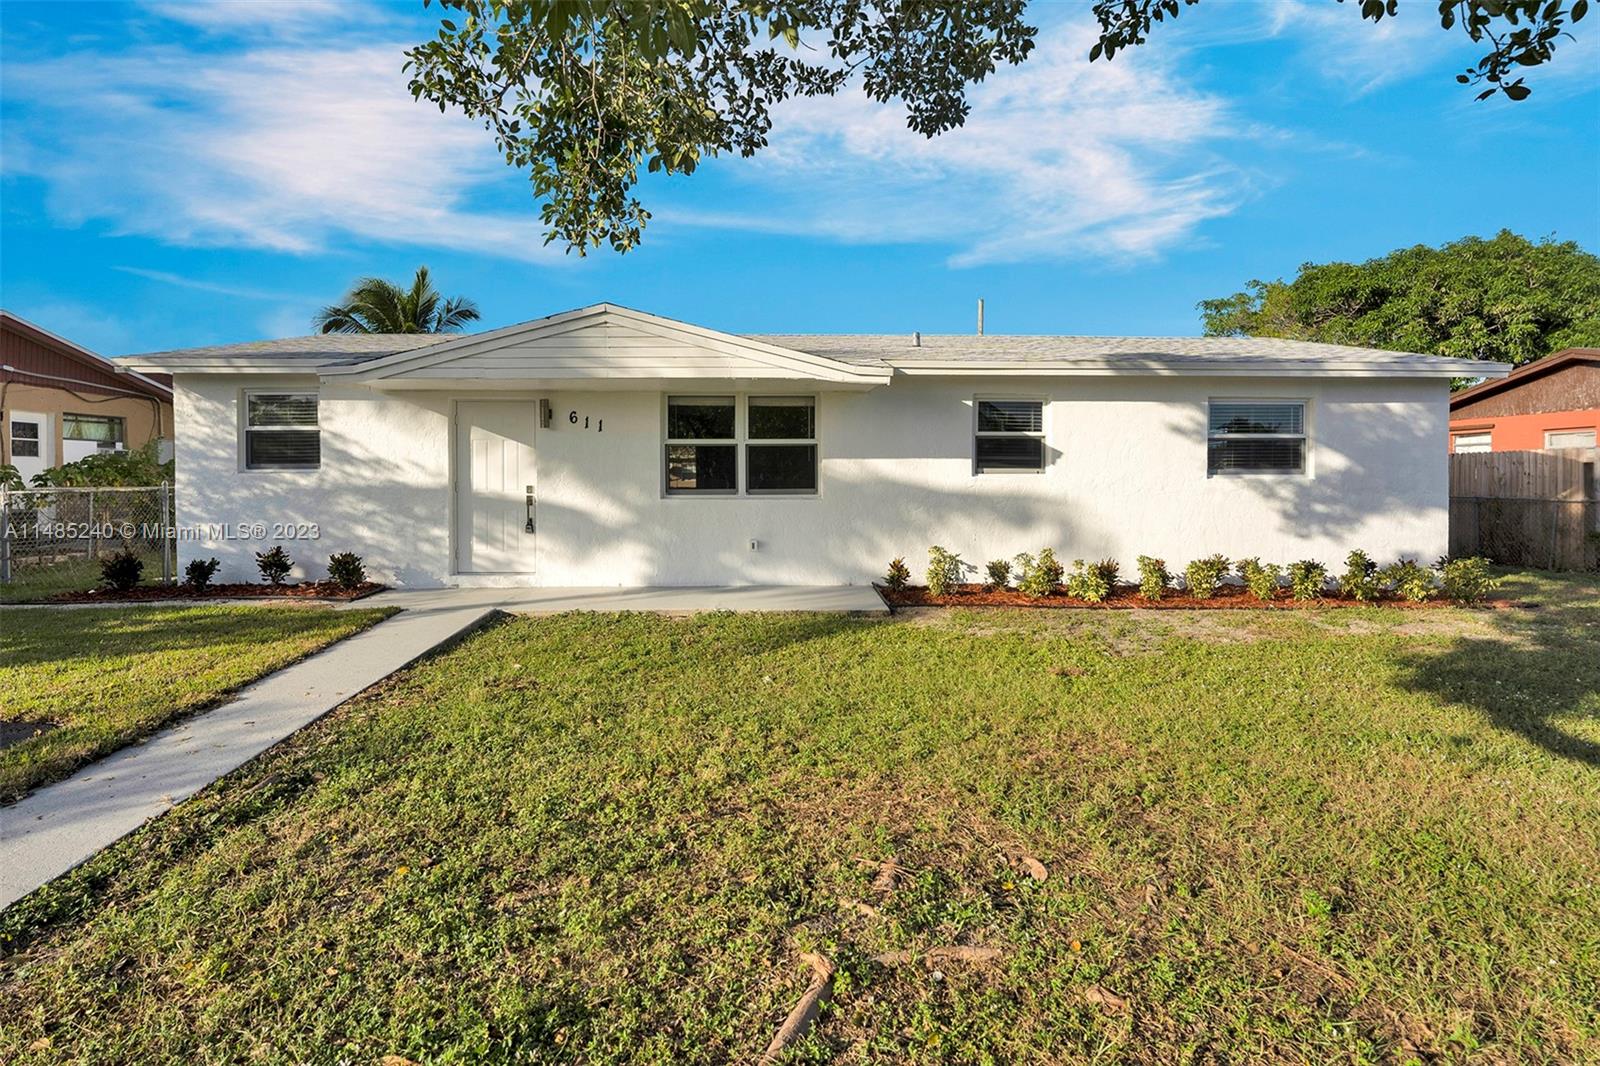 611 SW 11th Dr, Deerfield Beach, Florida 33441, 3 Bedrooms Bedrooms, ,2 BathroomsBathrooms,Residential,For Sale,611 SW 11th Dr,A11485240